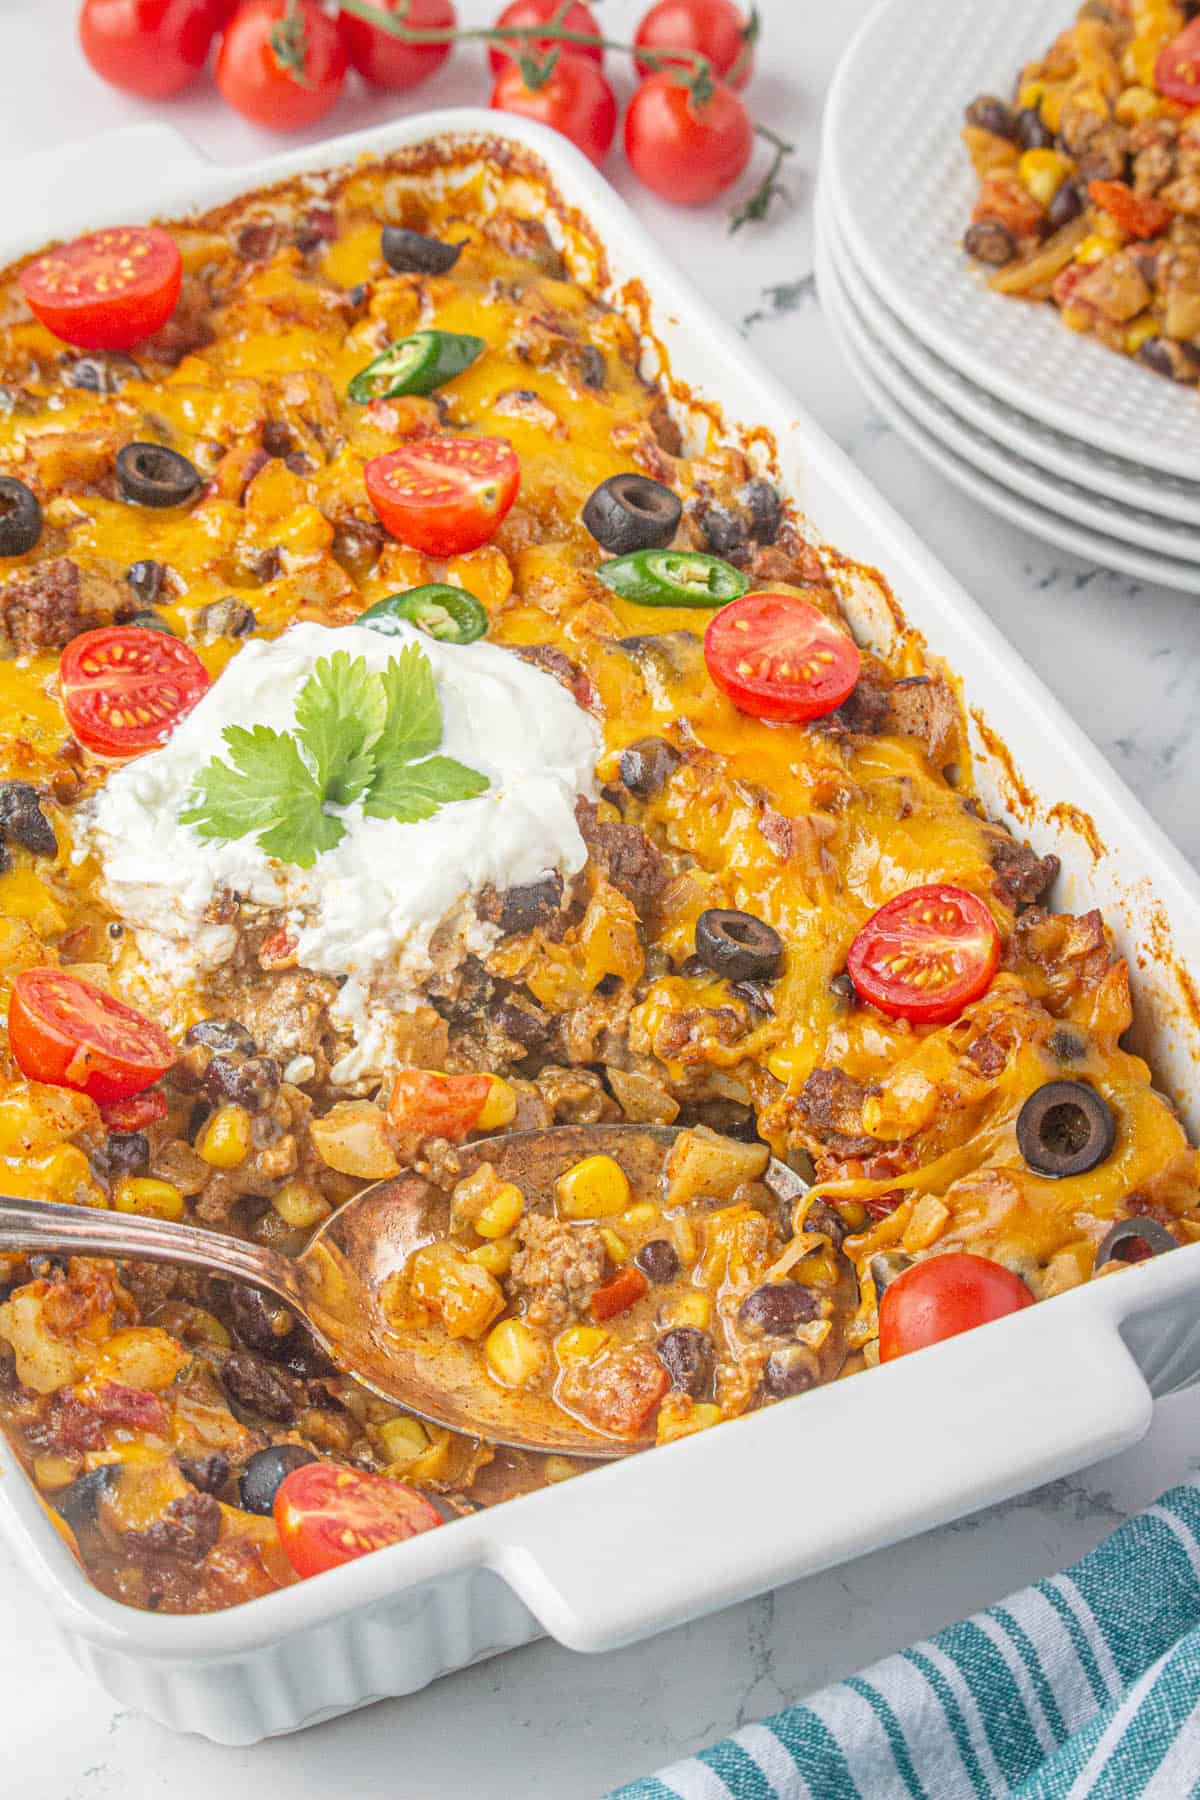 Taco casserole in a baking dish with a serving spoon.